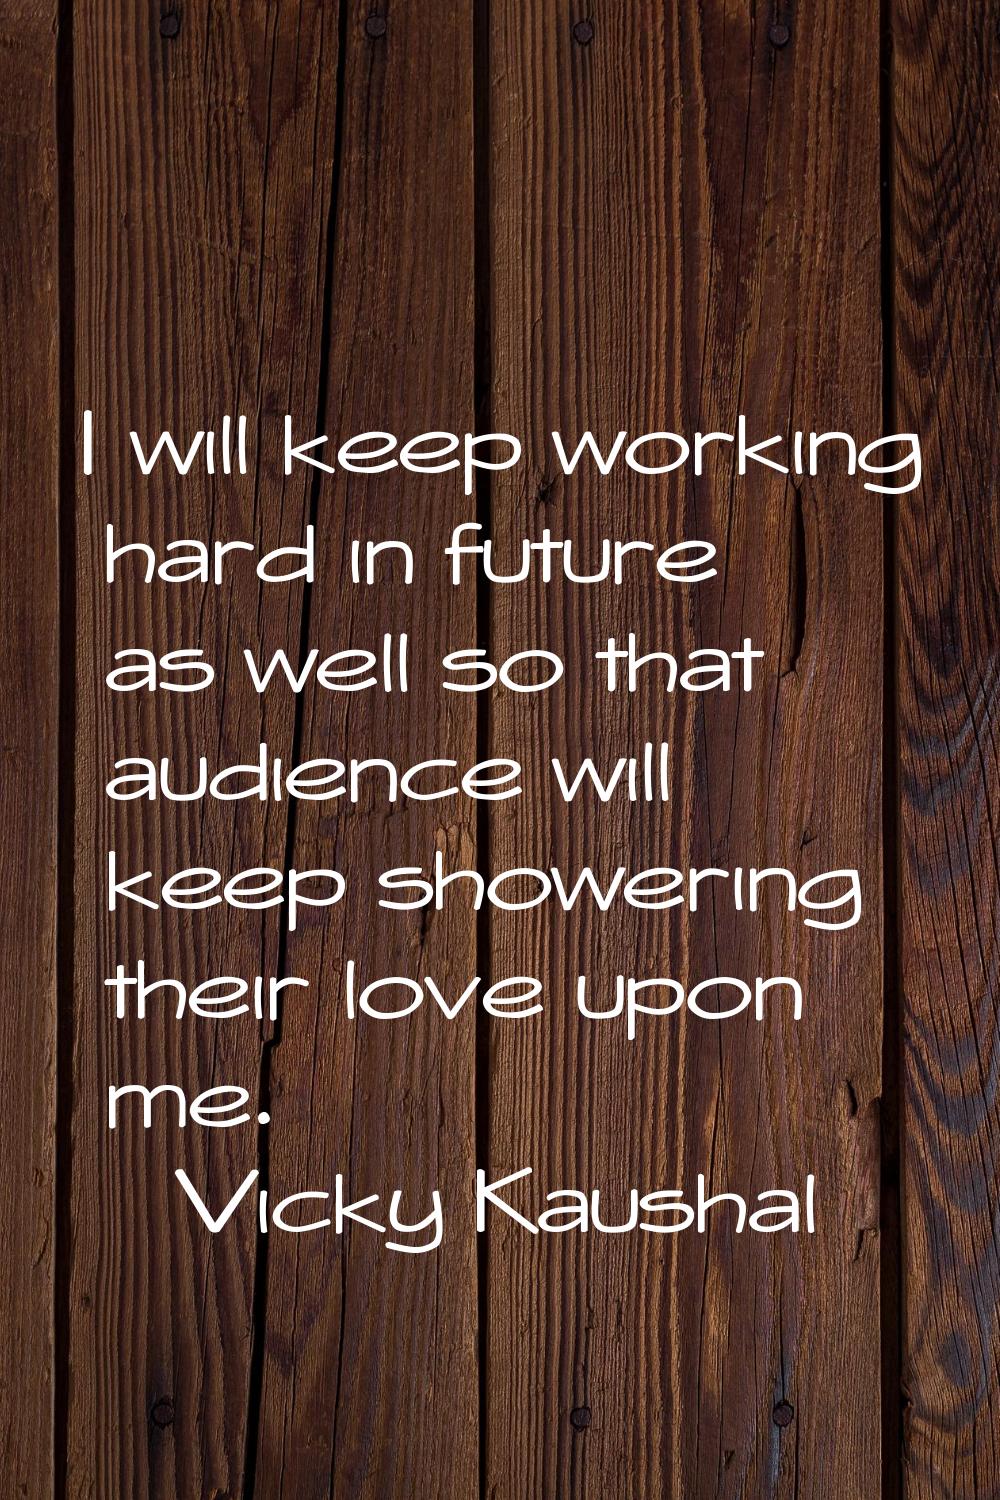 I will keep working hard in future as well so that audience will keep showering their love upon me.